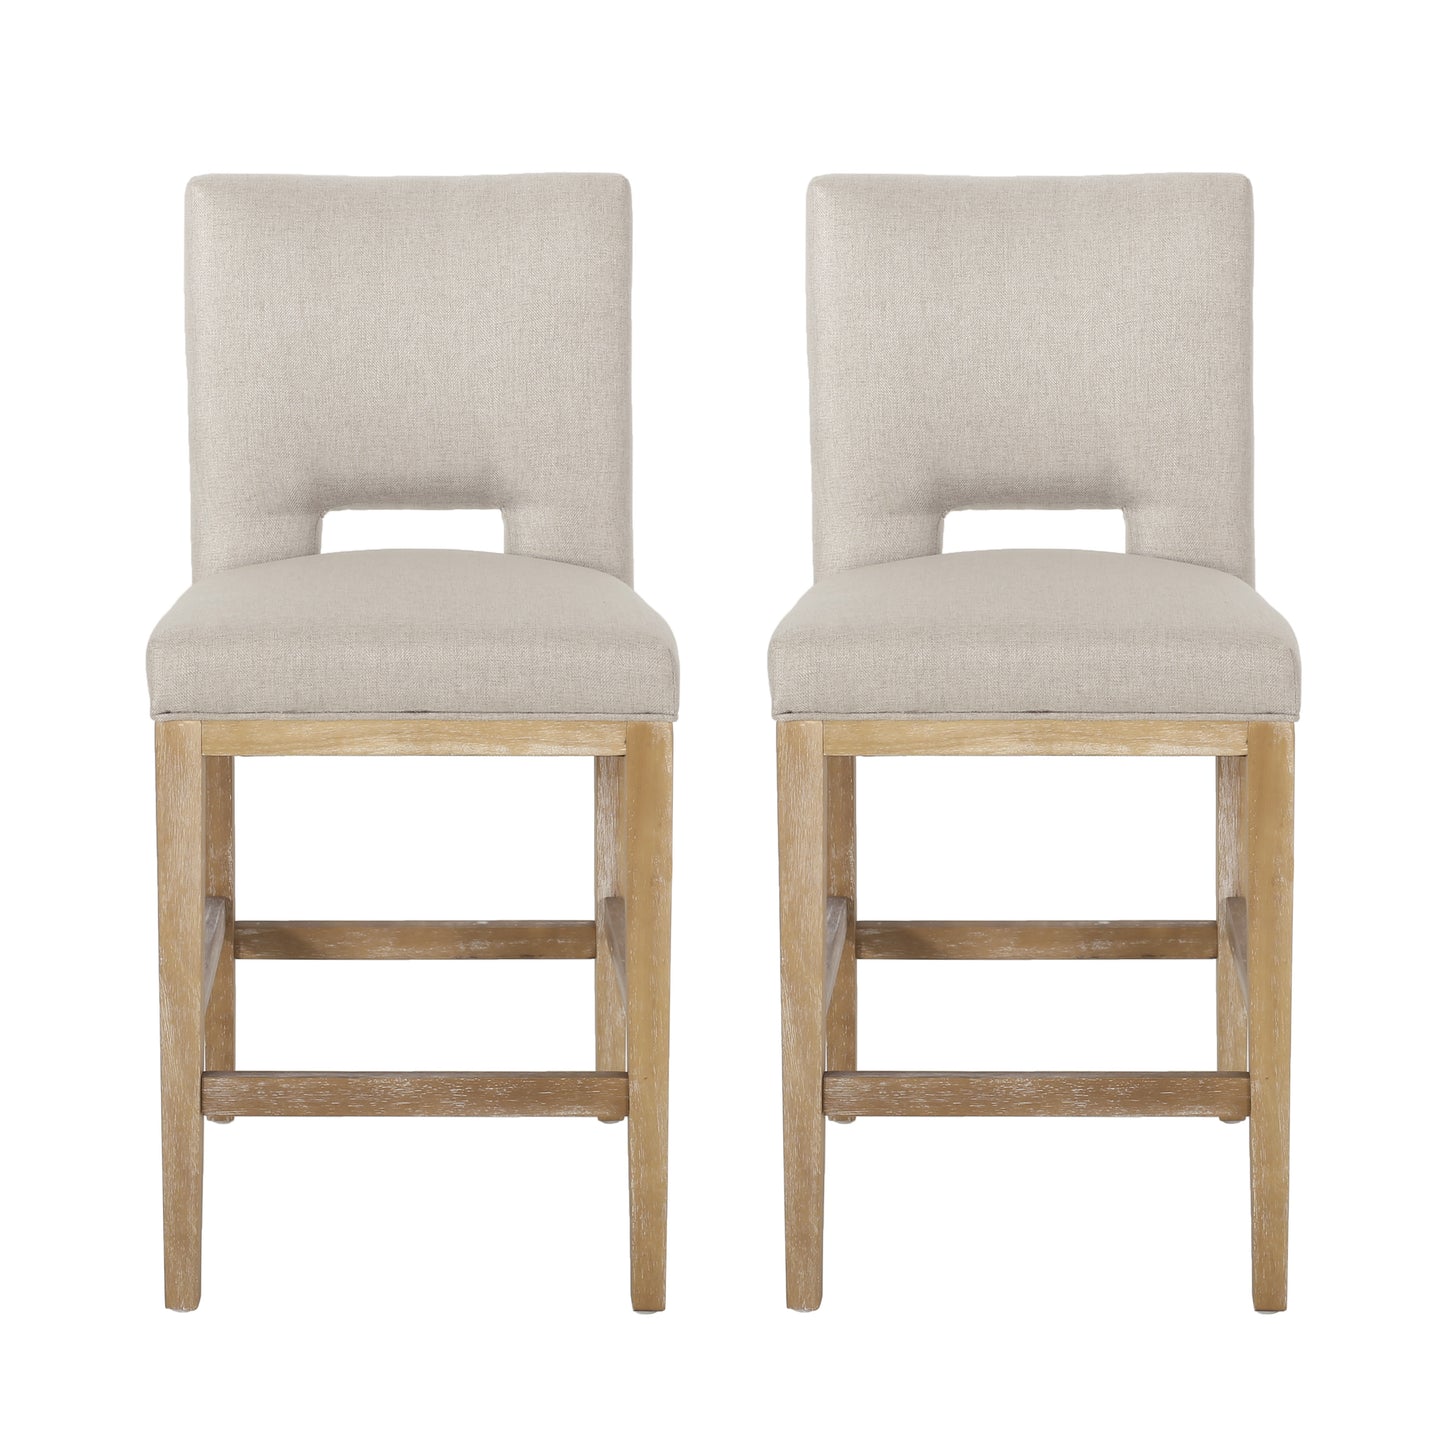 Kiara Contemporary Fabric Upholstered 27 Inch Counter Stools (Set of 2)